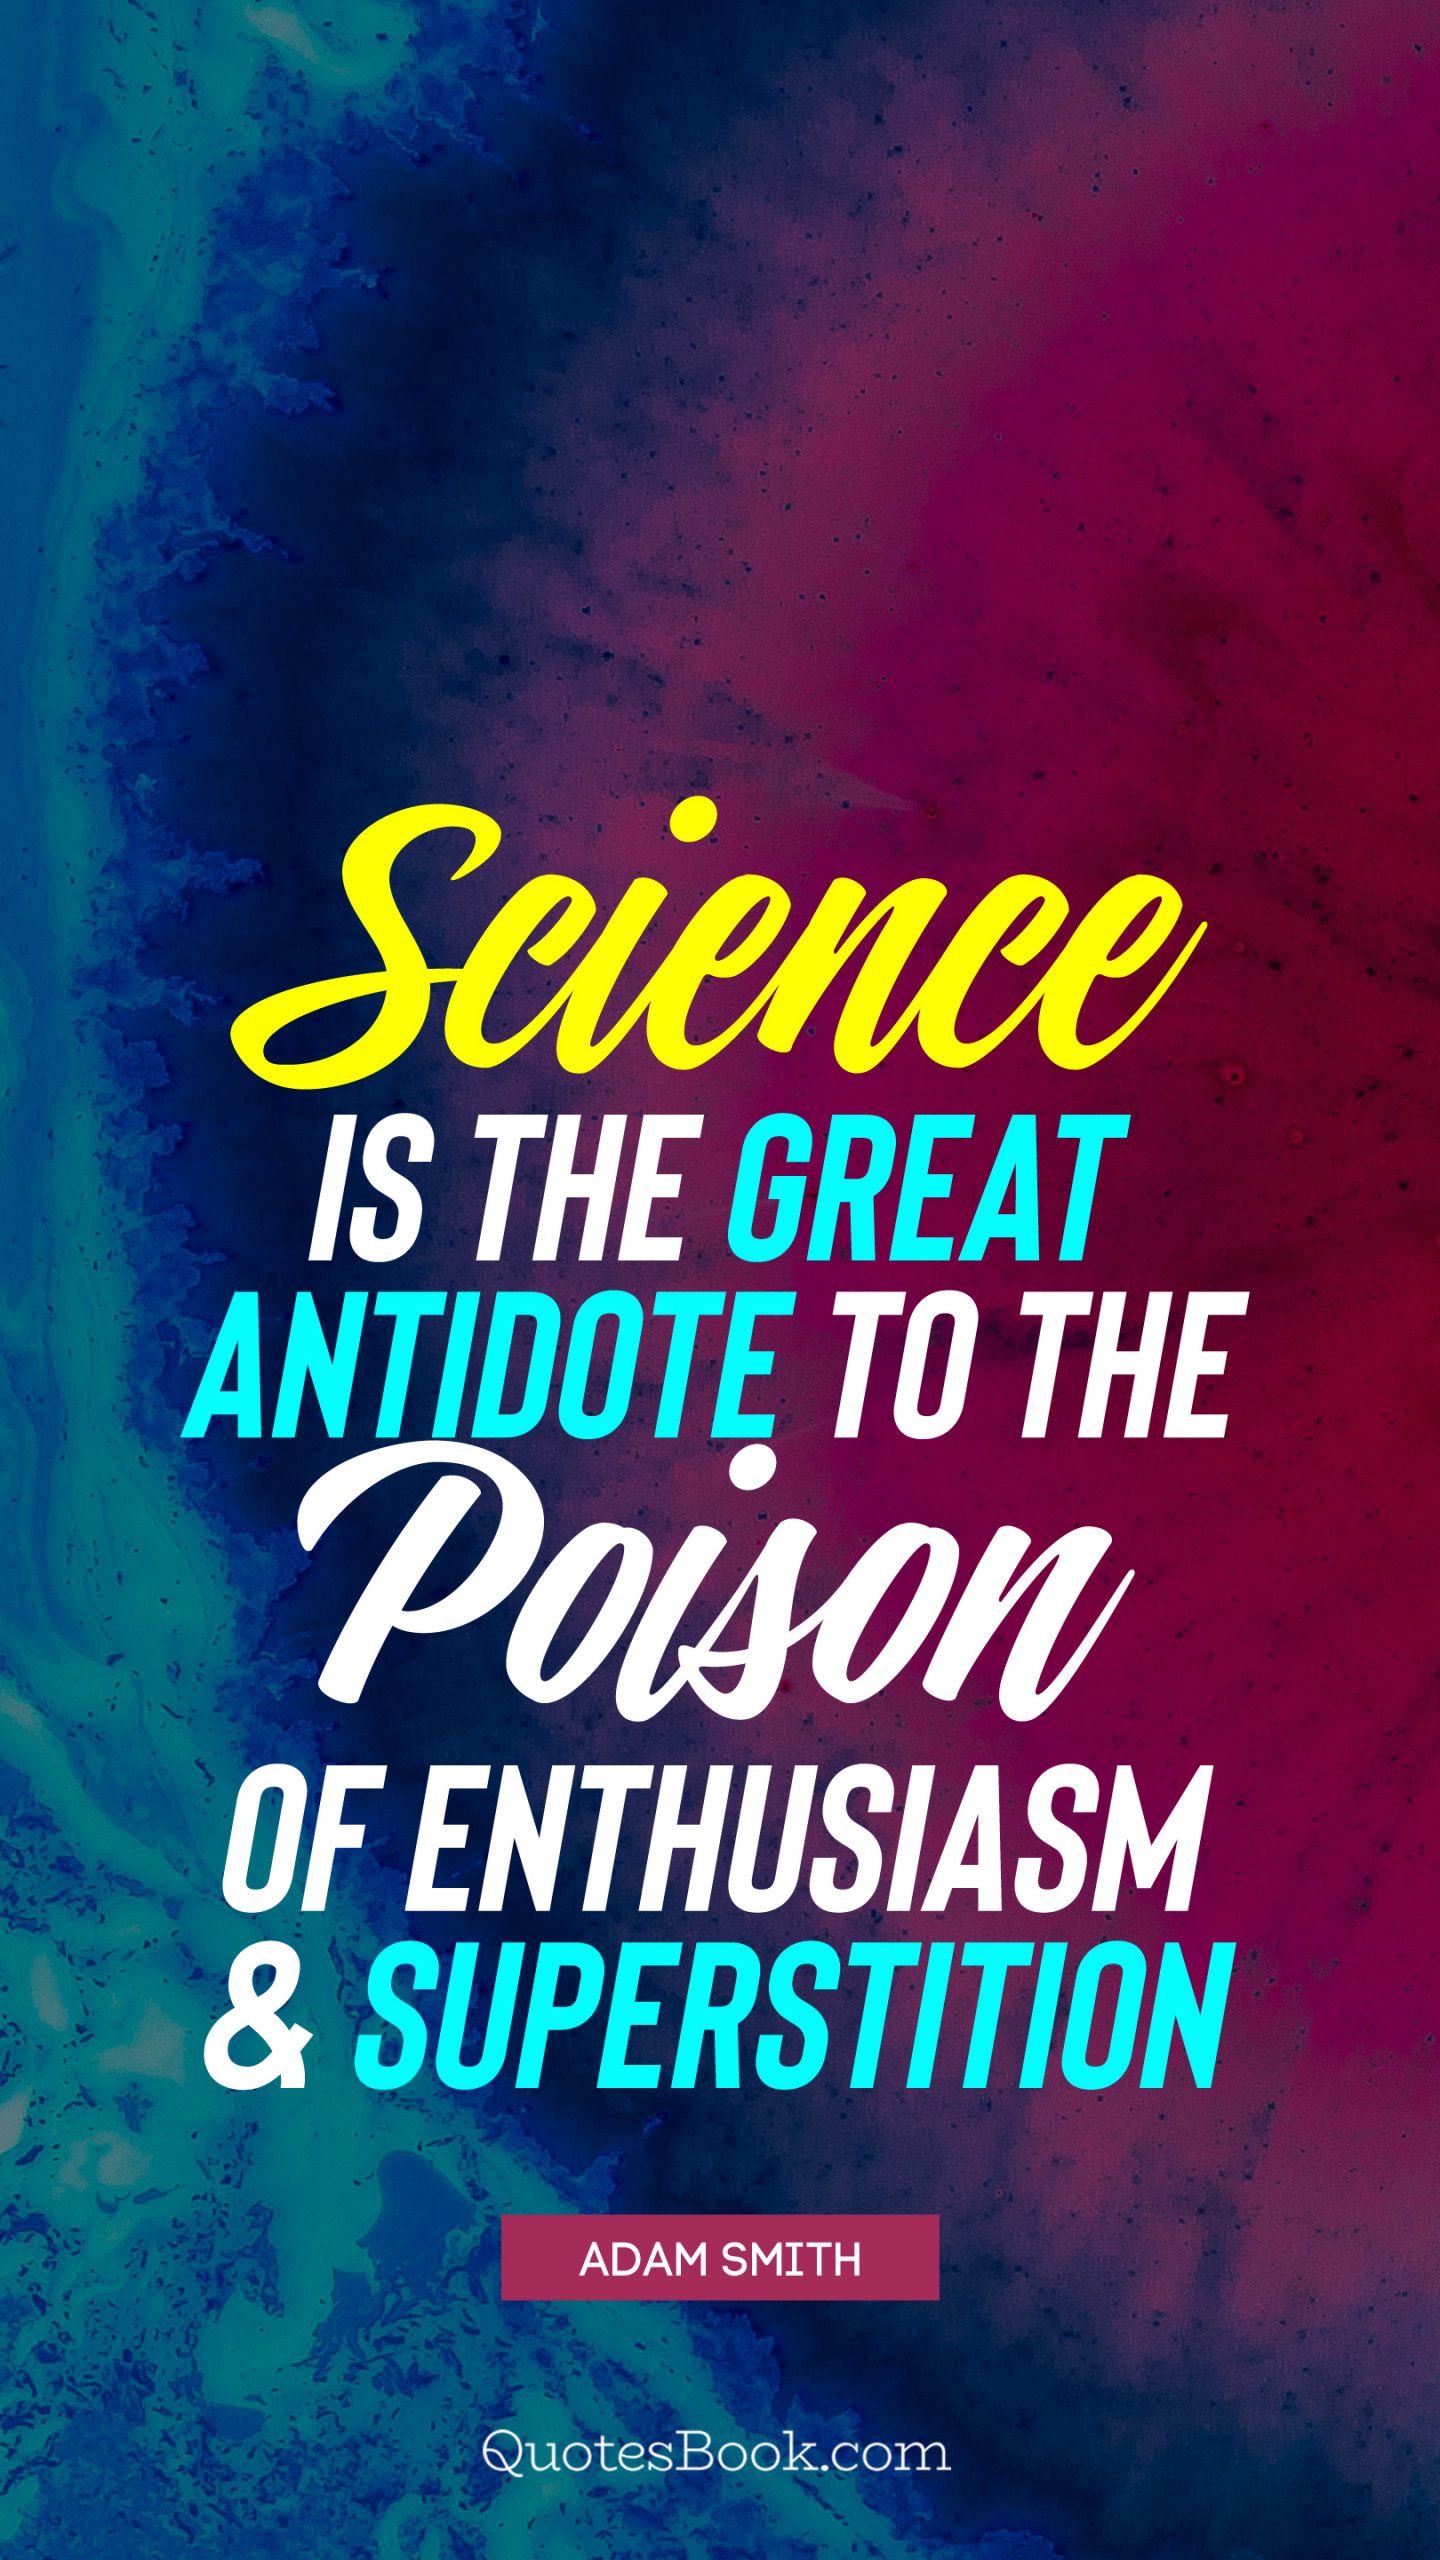 Science is the great antidote to the poison of enthusiasm and